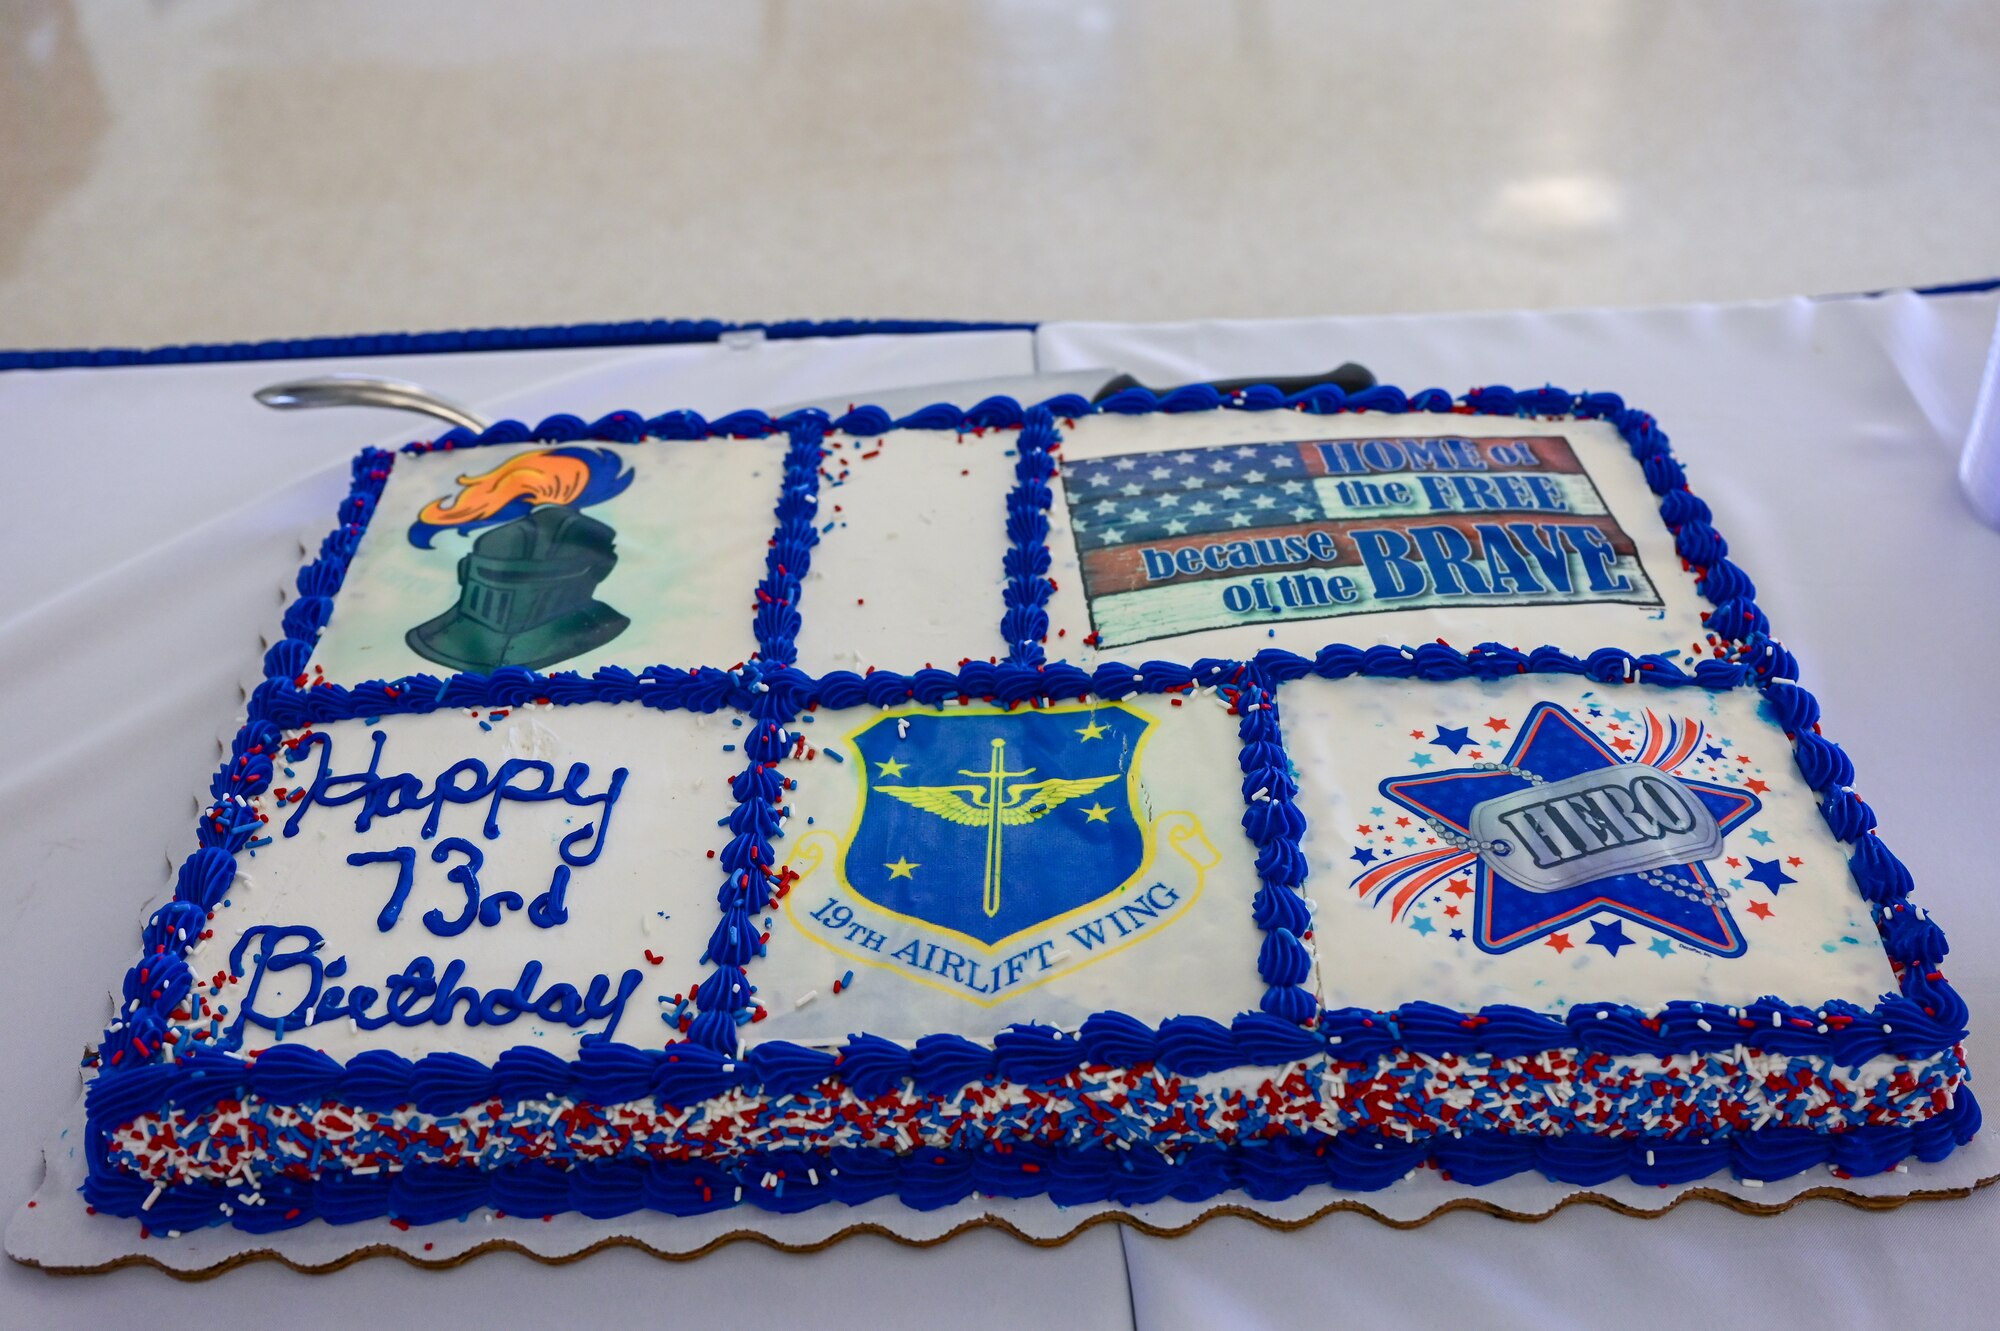 A birthday cake celebrating the 19th Airlift Wing's 73rd birthday